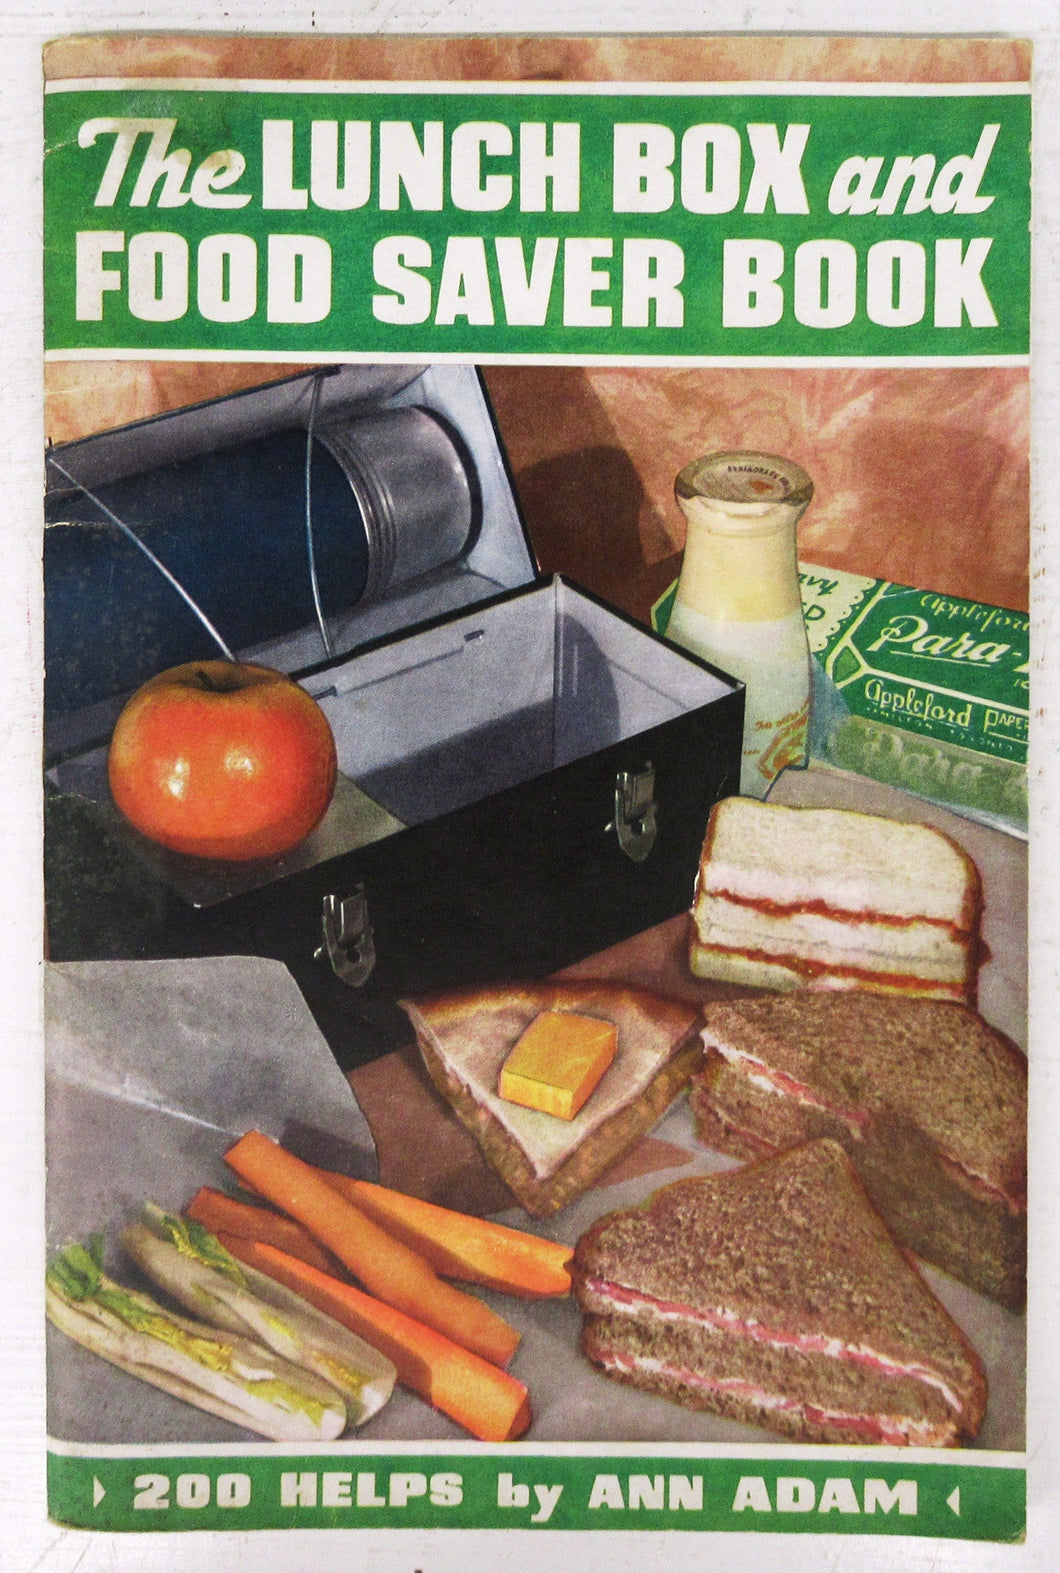 The Lunch Box and Food Saver Book